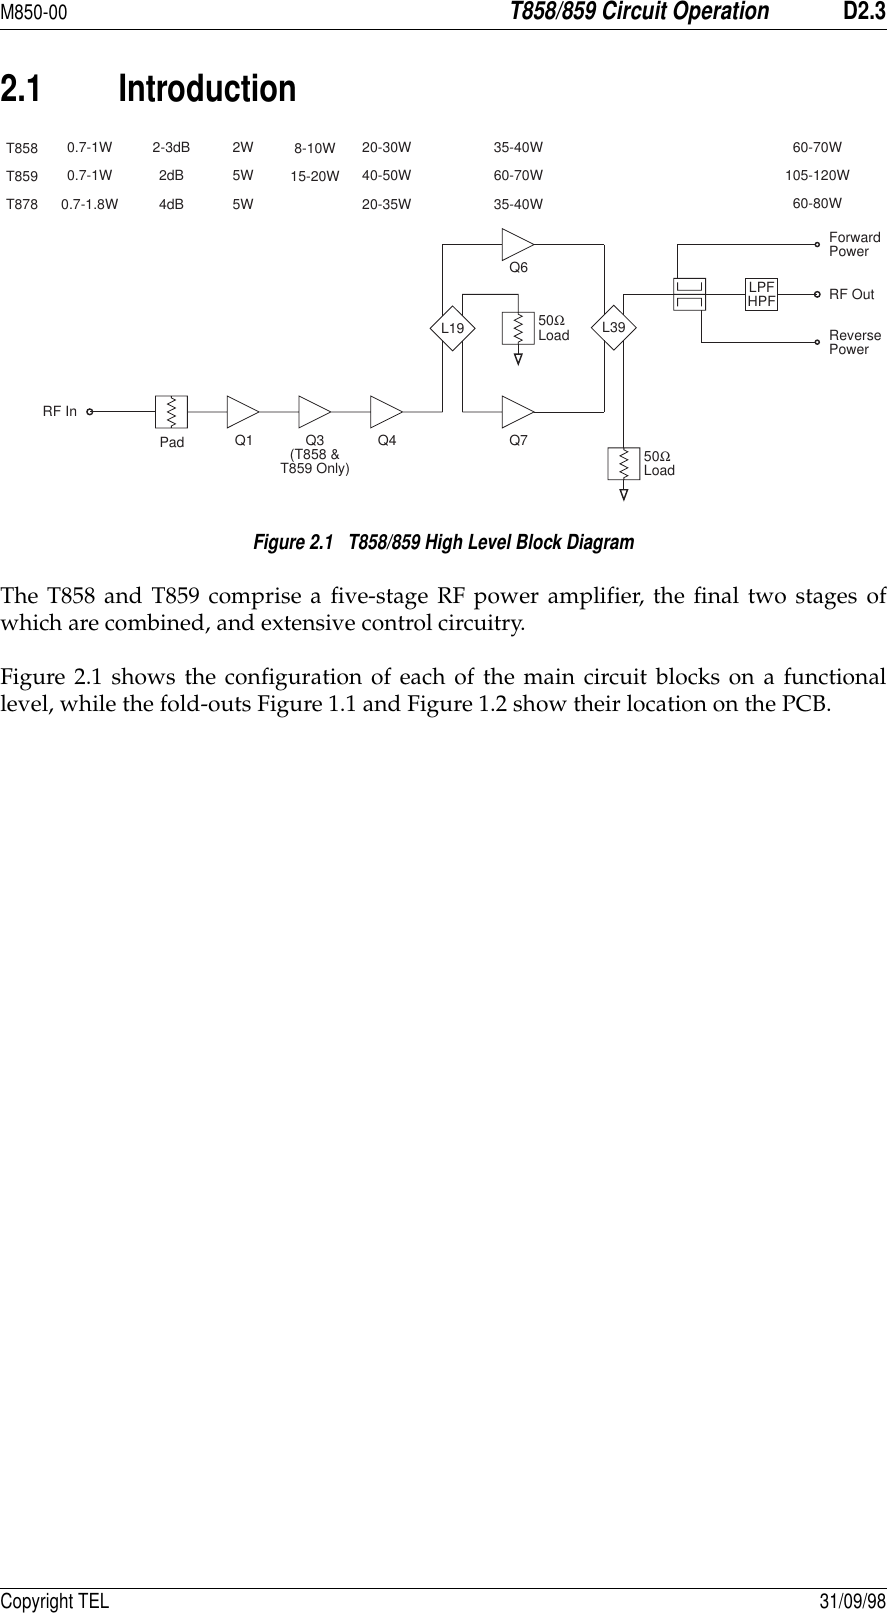 M850-00T858/859 Circuit OperationD2.3Copyright TEL 31/09/982.1 IntroductionFigure 2.1   T858/859 High Level Block DiagramThe T858 and T859 comprise a five-stage RF power amplifier, the final two stages ofwhich are combined, and extensive control circuitry.Figure 2.1 shows the configuration of each of the main circuit blocks on a functionallevel, while the fold-outs Figure 1.1 and Figure 1.2 show their location on the PCB.L19 L39LPFHPF50LoadΩ50LoadΩQ1 Q3(T858 &amp;T859 Only)Q4 Q7PadRF InQ60.7-1W0.7-1W0.7-1.8W2-3dB2dB4dB2W5W5W8-10W15-20W20-30W40-50W20-35W35-40W60-70W35-40W60-70W105-120W60-80WForwardPowerRF OutReversePowerT858T859T878